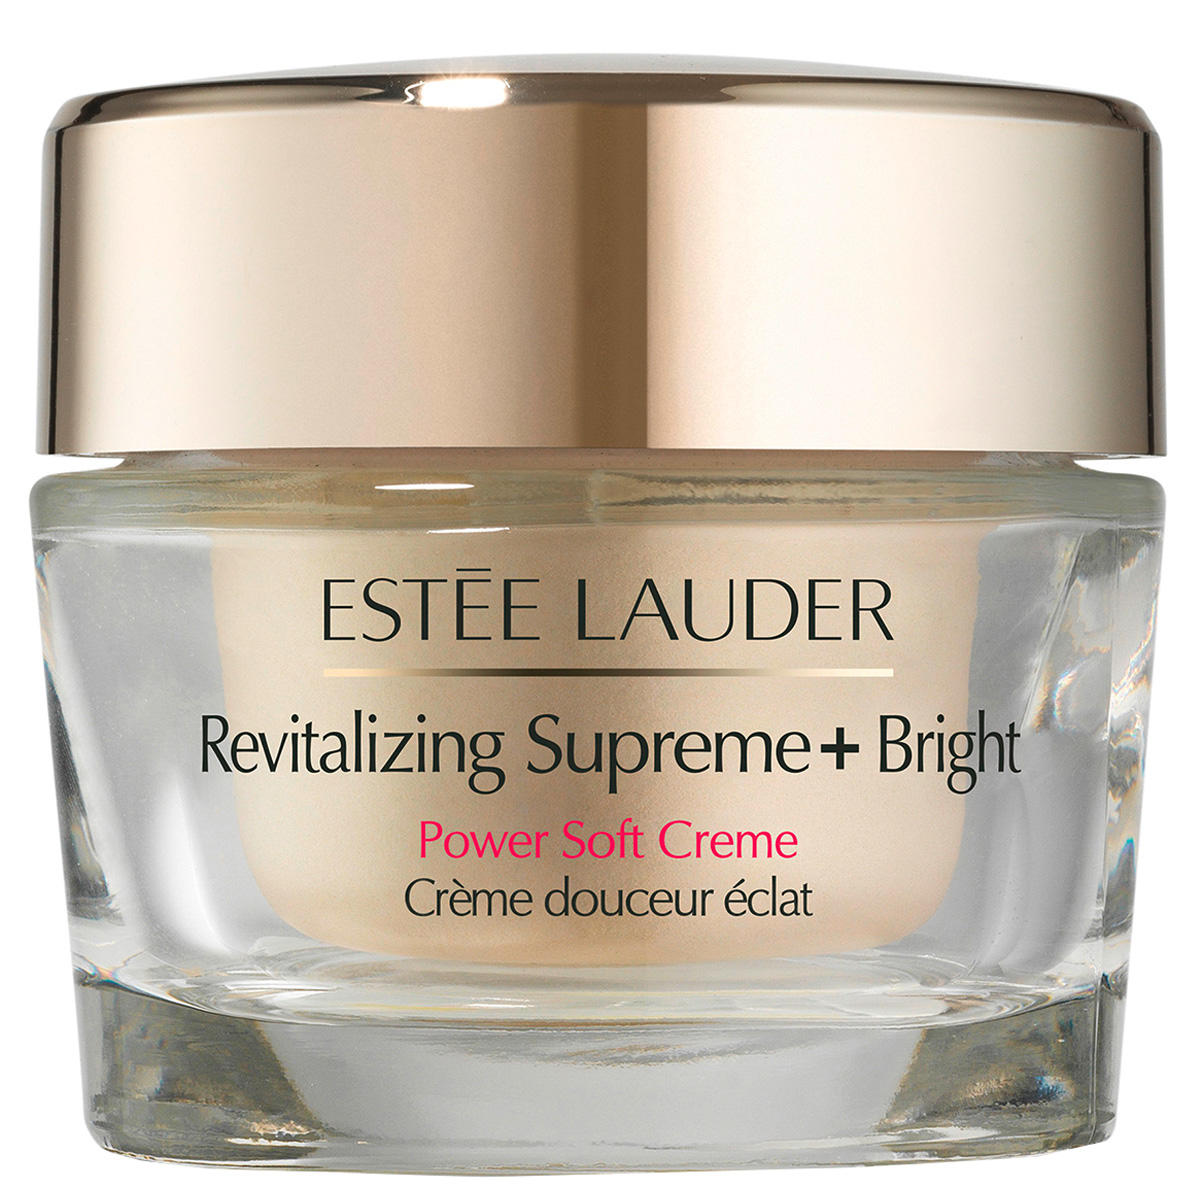 Estee Lauder Holiday Blockbuster Celestial GLOW 11 Full Sizes + More $85  with any Estee Lauder Purchase, a $615 Value! | Dillard's